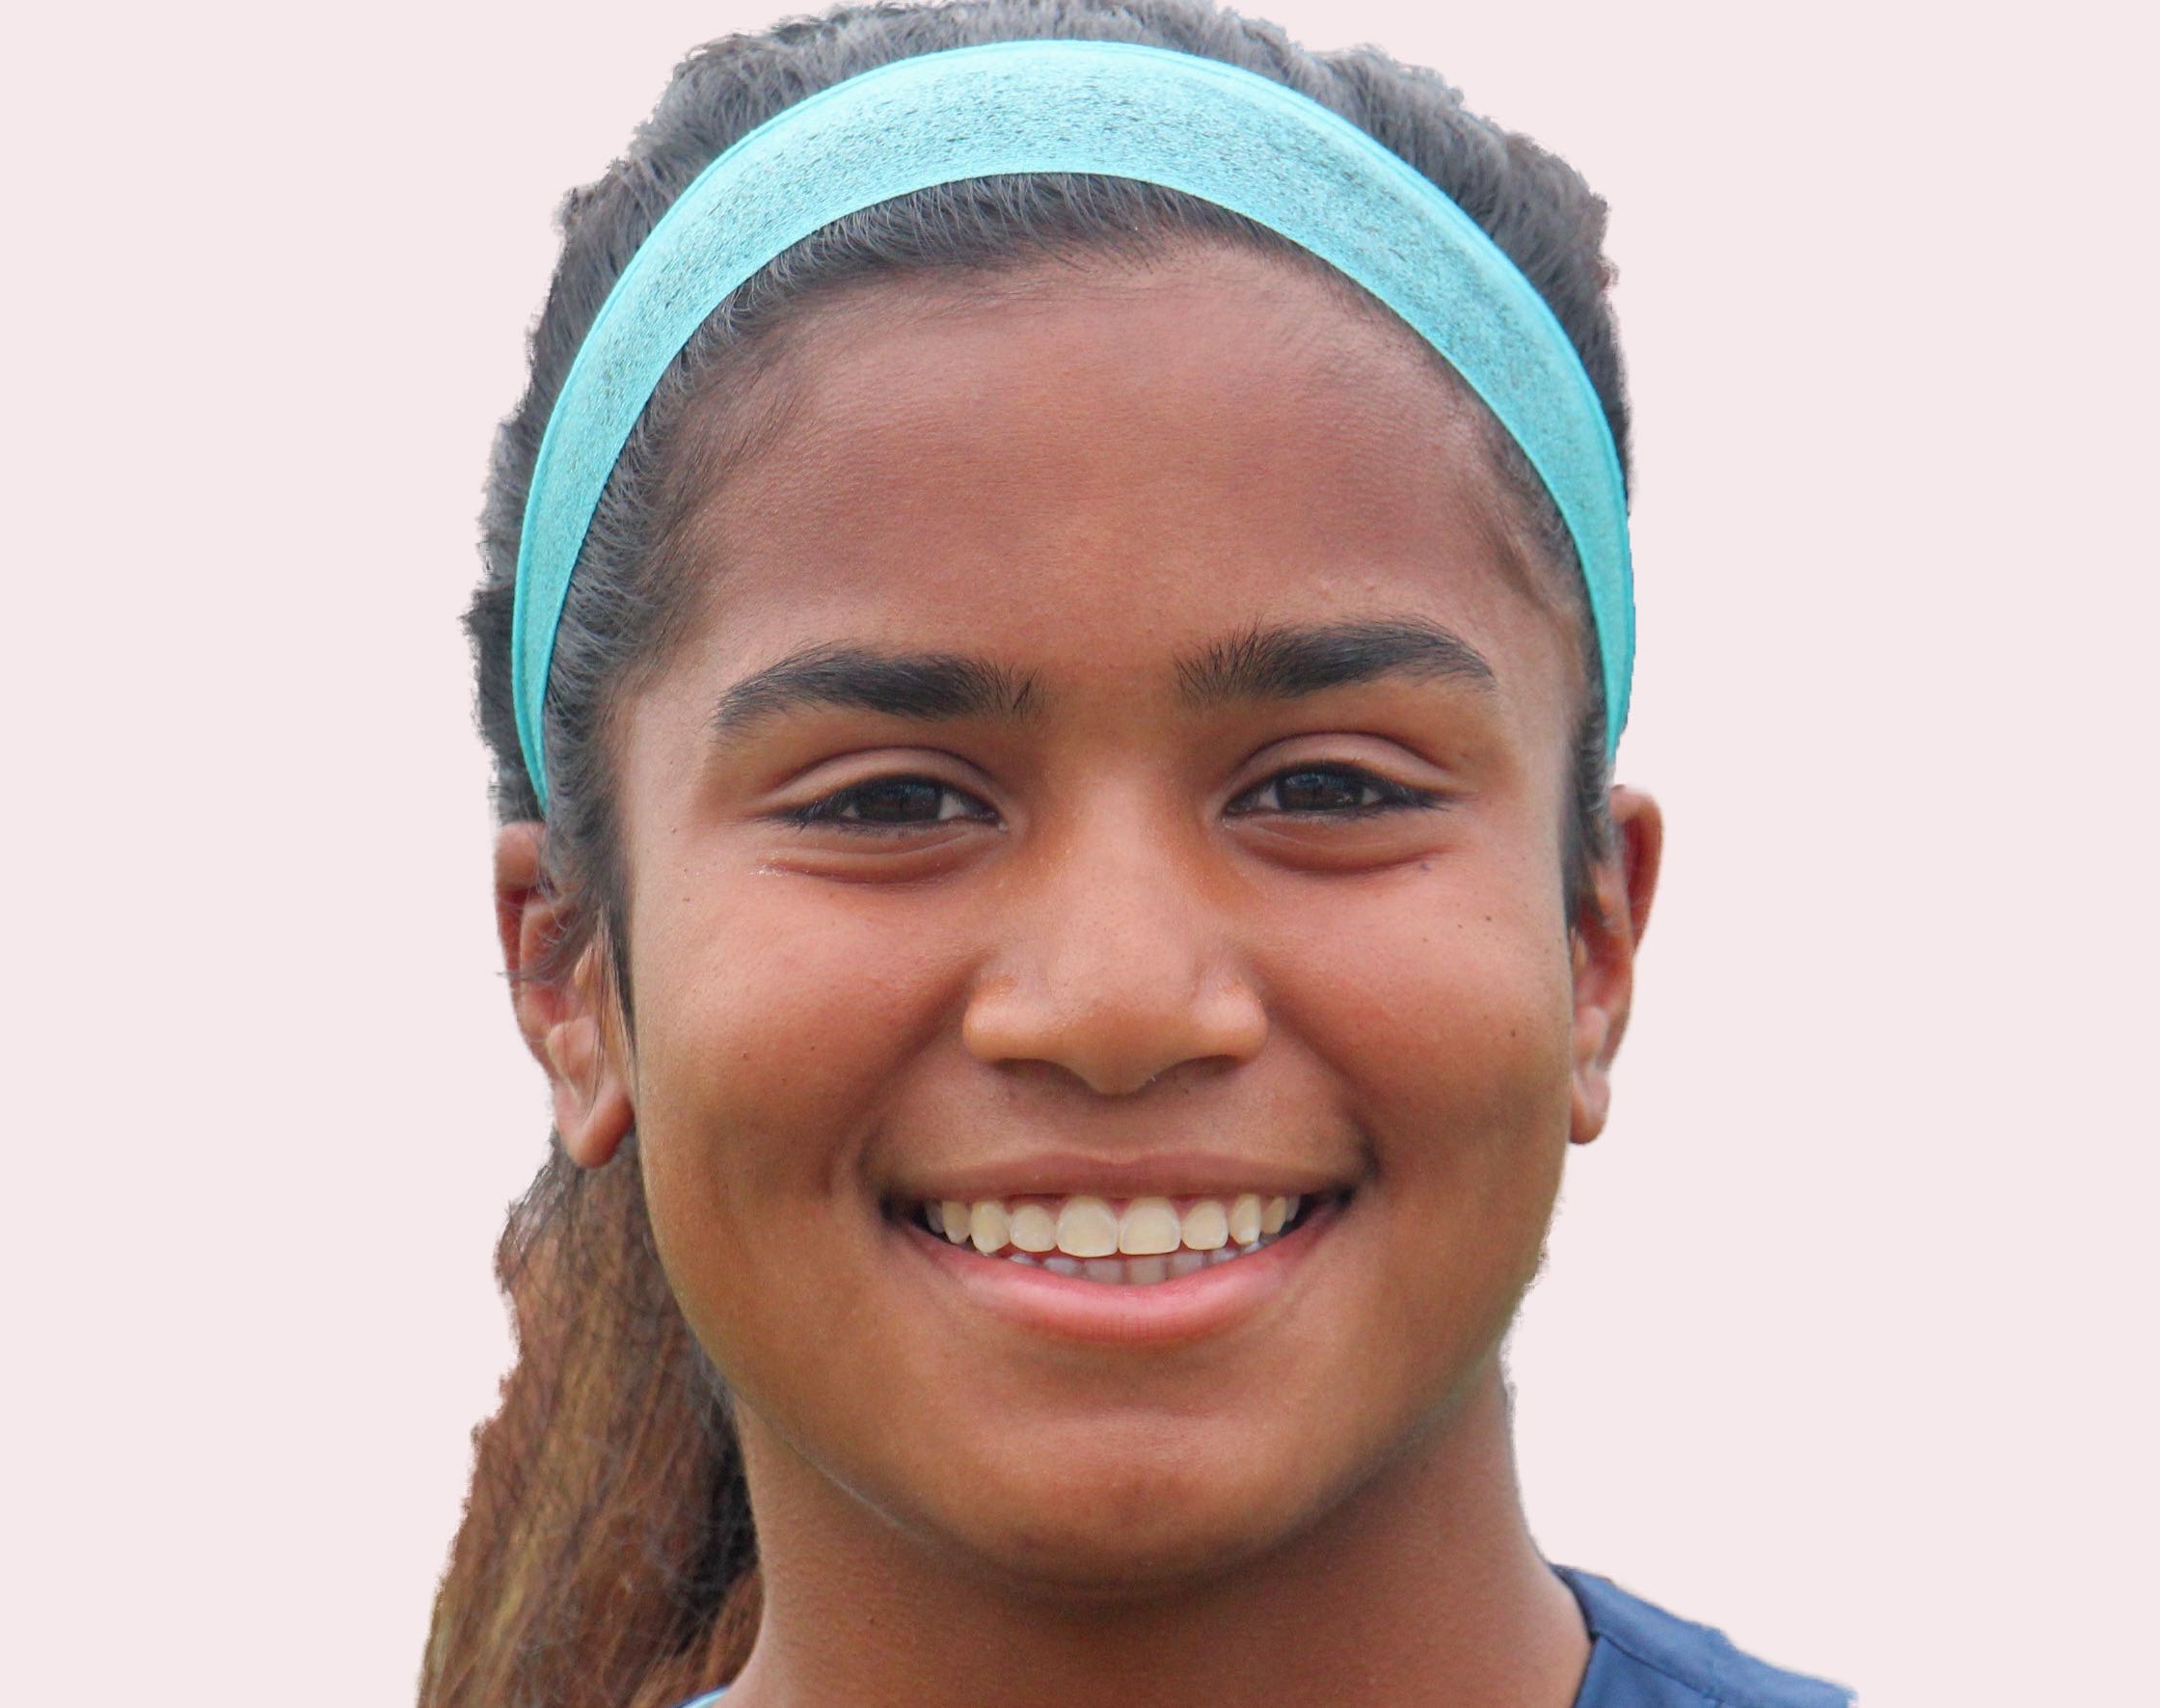 Rampersad ready to play her part in T&T’s qualifying bid at U-20 Championship.